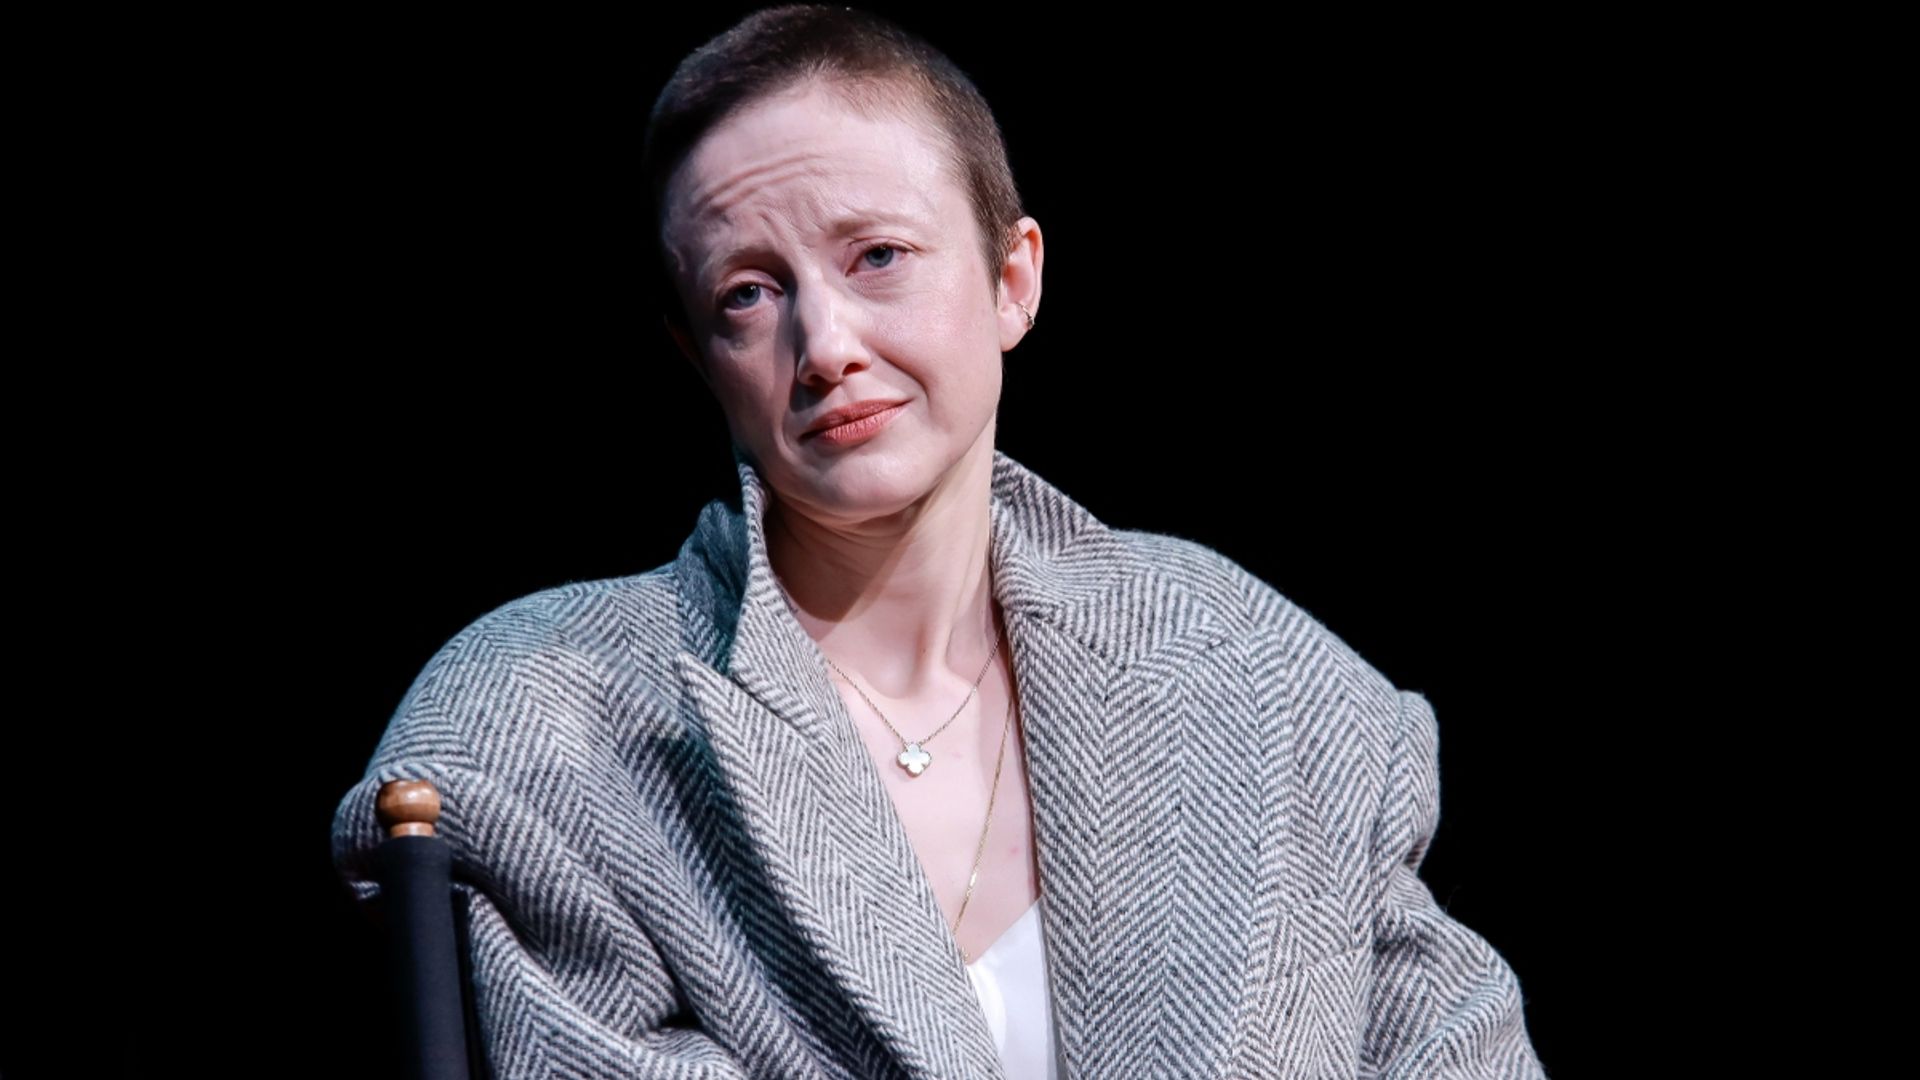 Why is Andrea Riseborough's Oscar nomination so controversial? Drama explained